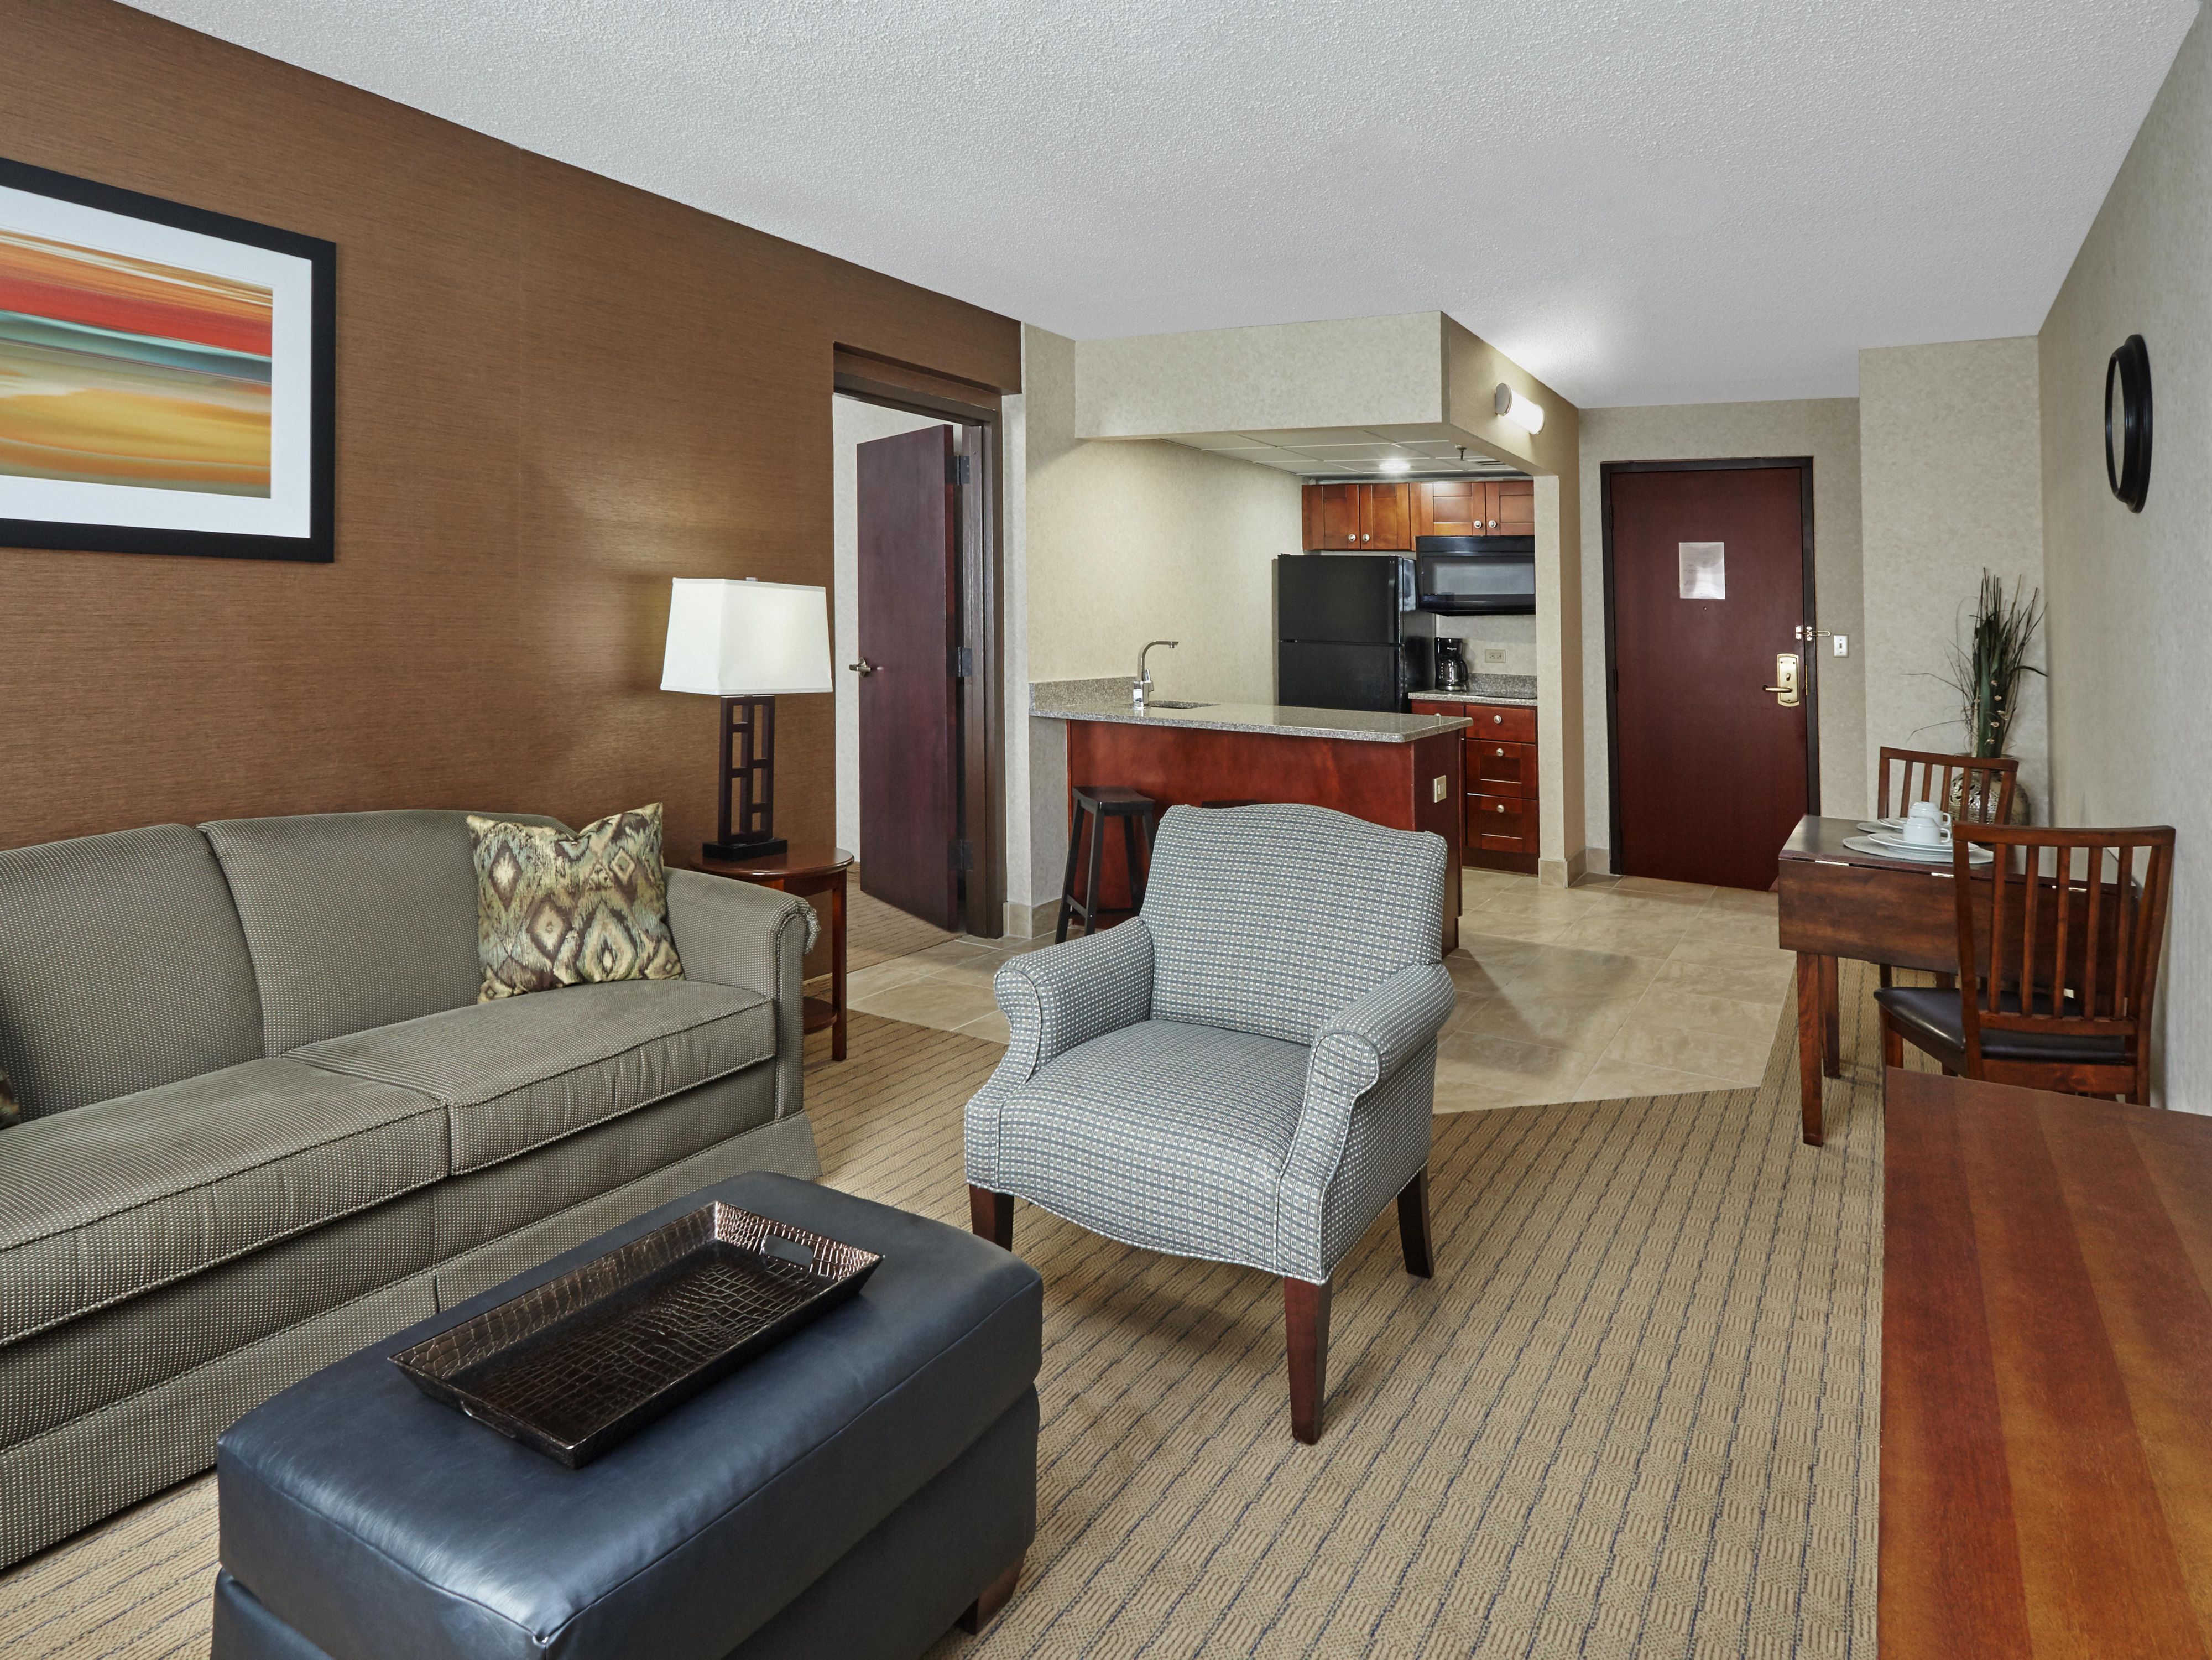 Holiday Inn Carol Stream offers apartment style guest suites for those needing to stay for thirty nights or more. We welcome families or individuals that are relocating to the area with our two room suites. Contact our Sales Department for long term pricing. Let us be your home away from home, where you can enjoy our superior service. 